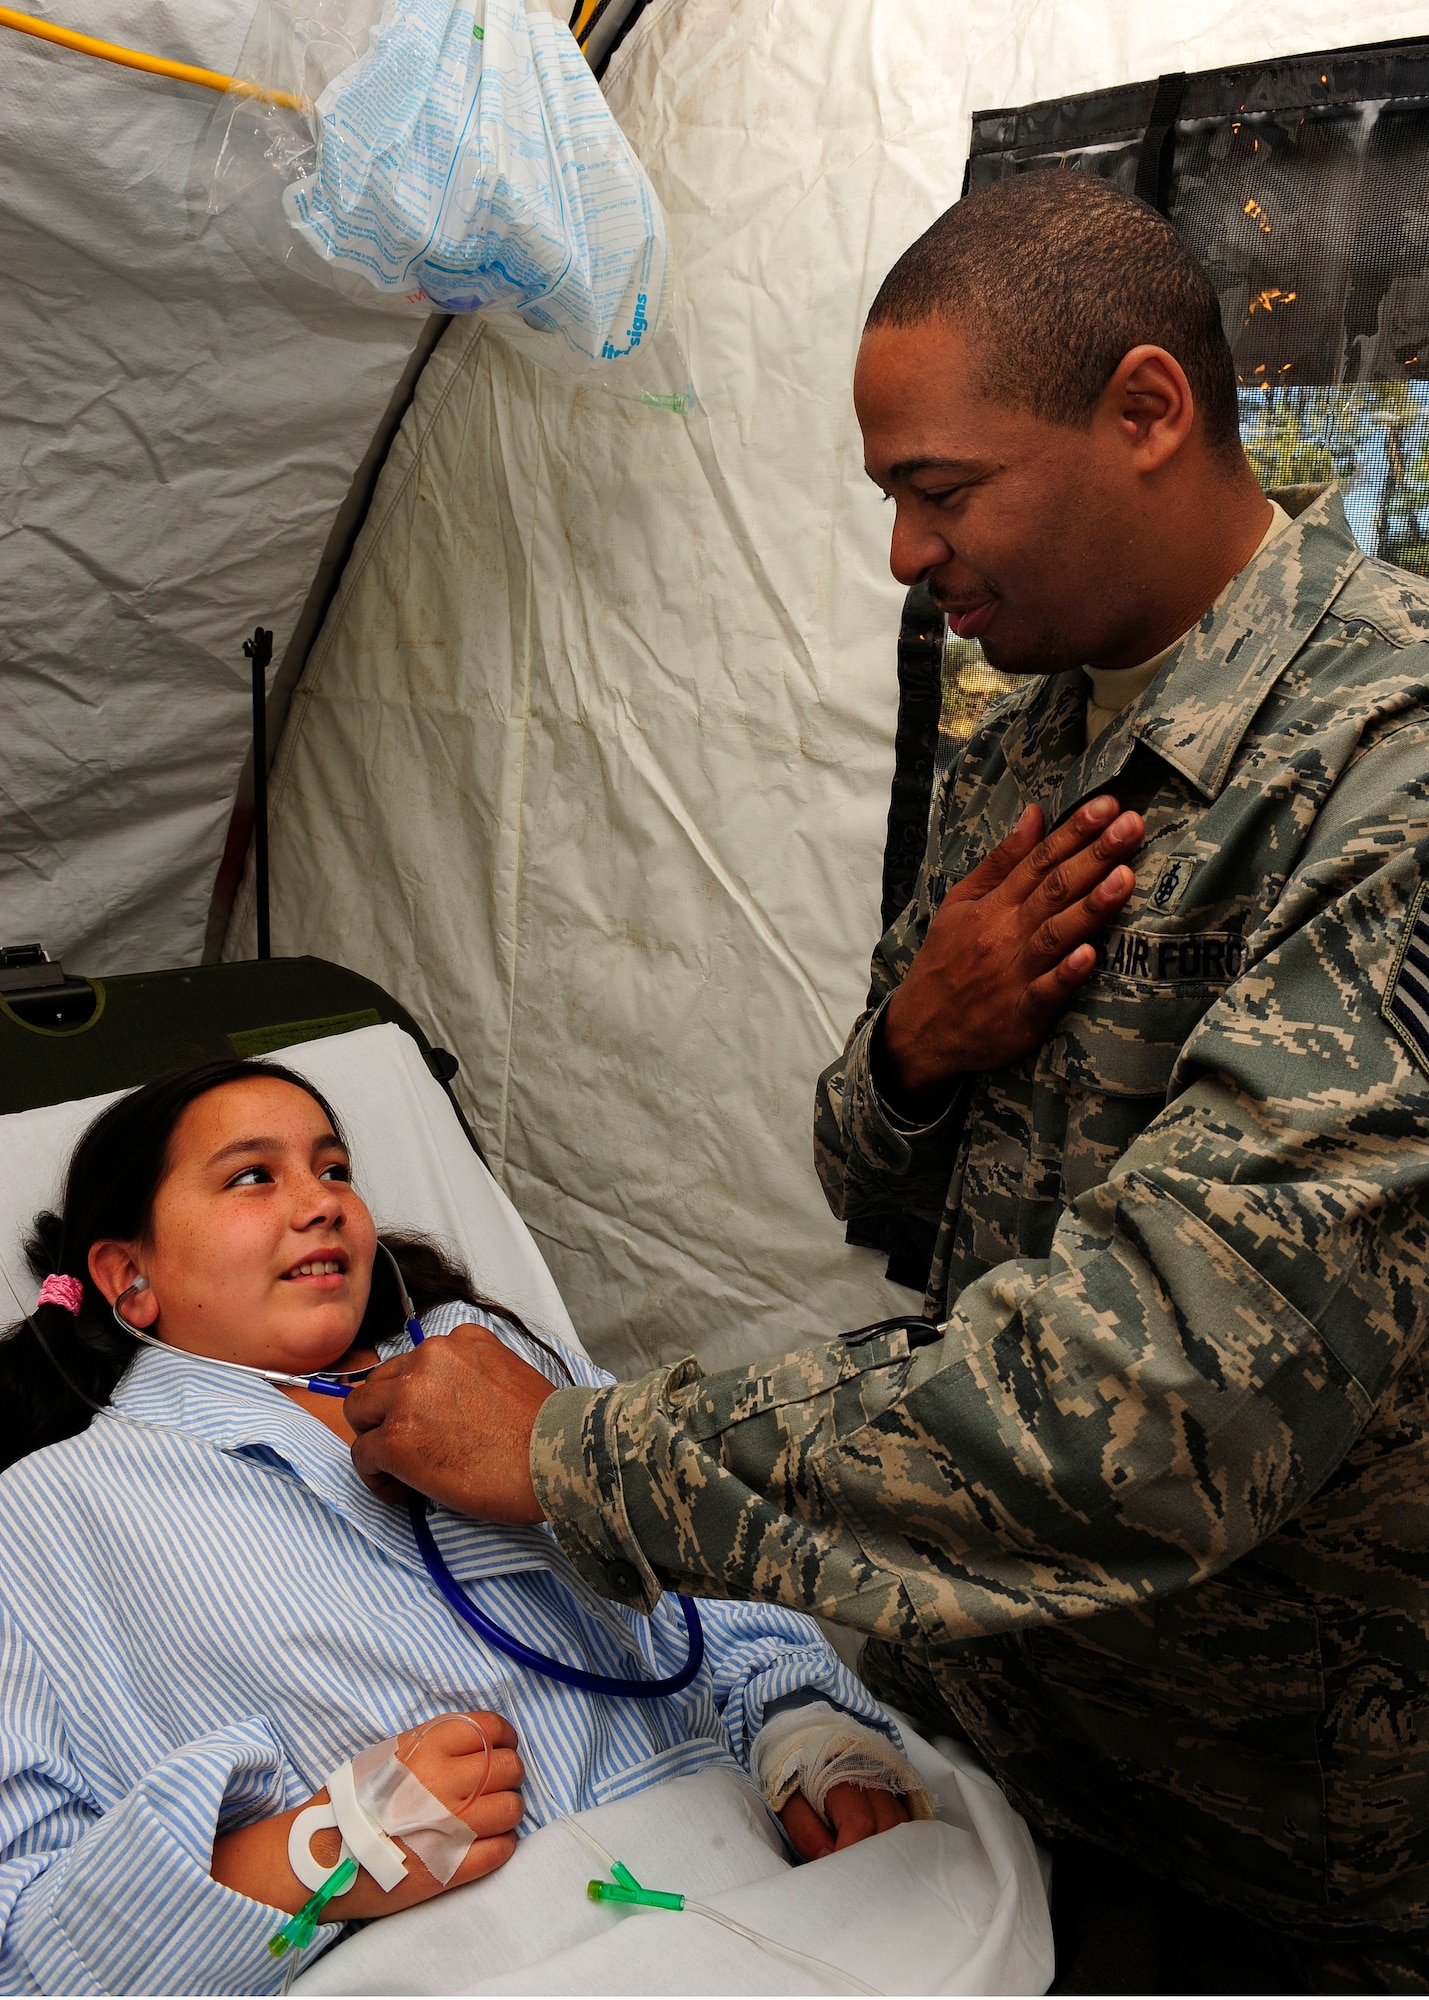 Tech. Sgt. Donelle Clark explains how a stethoscope works to a Chilean child at the expeditionary hospital March 19, 2010, in Angol, Chile. About 60 medical Airmen are working alongside local Chilean medics to provide support to meet the daily medical needs of the local community in the mobile facility. The EMEDS team is equipped and staffed to provide surgical, primary care, pediatric, radiological, gynecological, laboratory and pharmaceutical services. Sergeant Clark is an aerospace medical technician assigned to the 81st Medical Surgical Squadron at Keesler Air Force Base, Miss. (U.S. Air Force photo/Senior Airman Tiffany Trojca)
